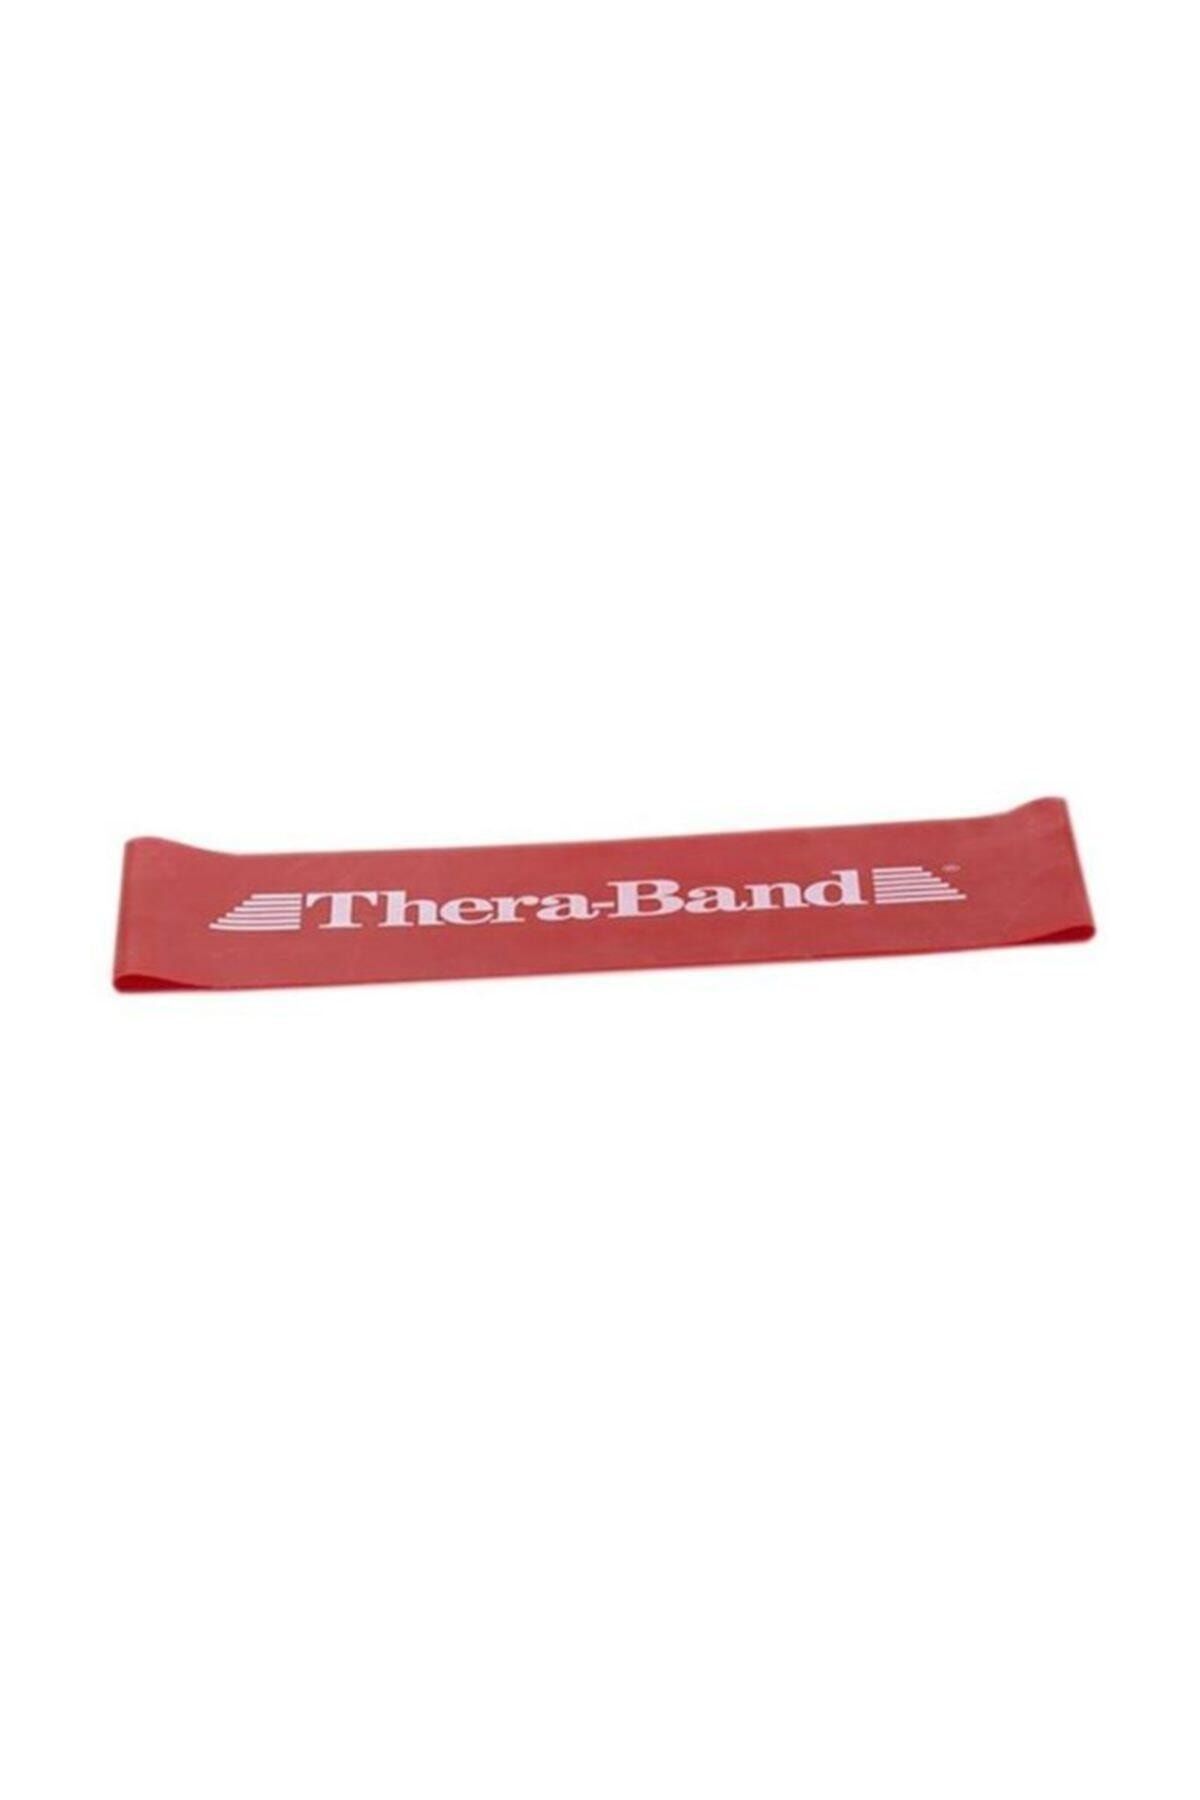 Theraband Resıstance Band Loop Red 18"